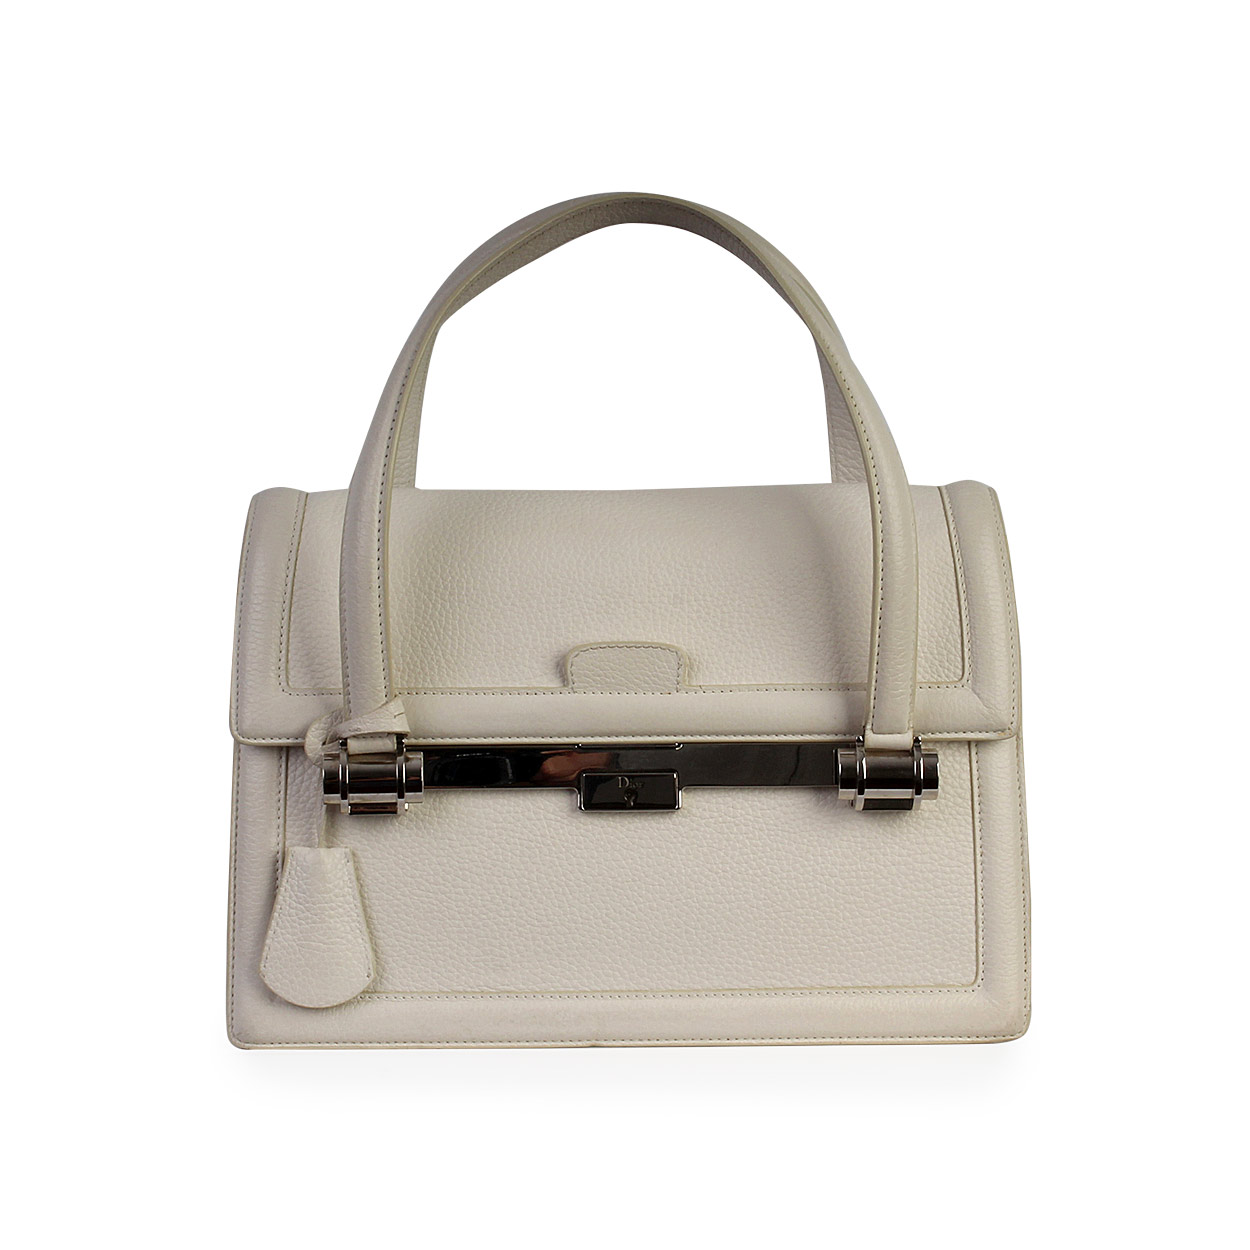 CHRISTIAN DIOR Pebbled Leather Satchel White | Luxity